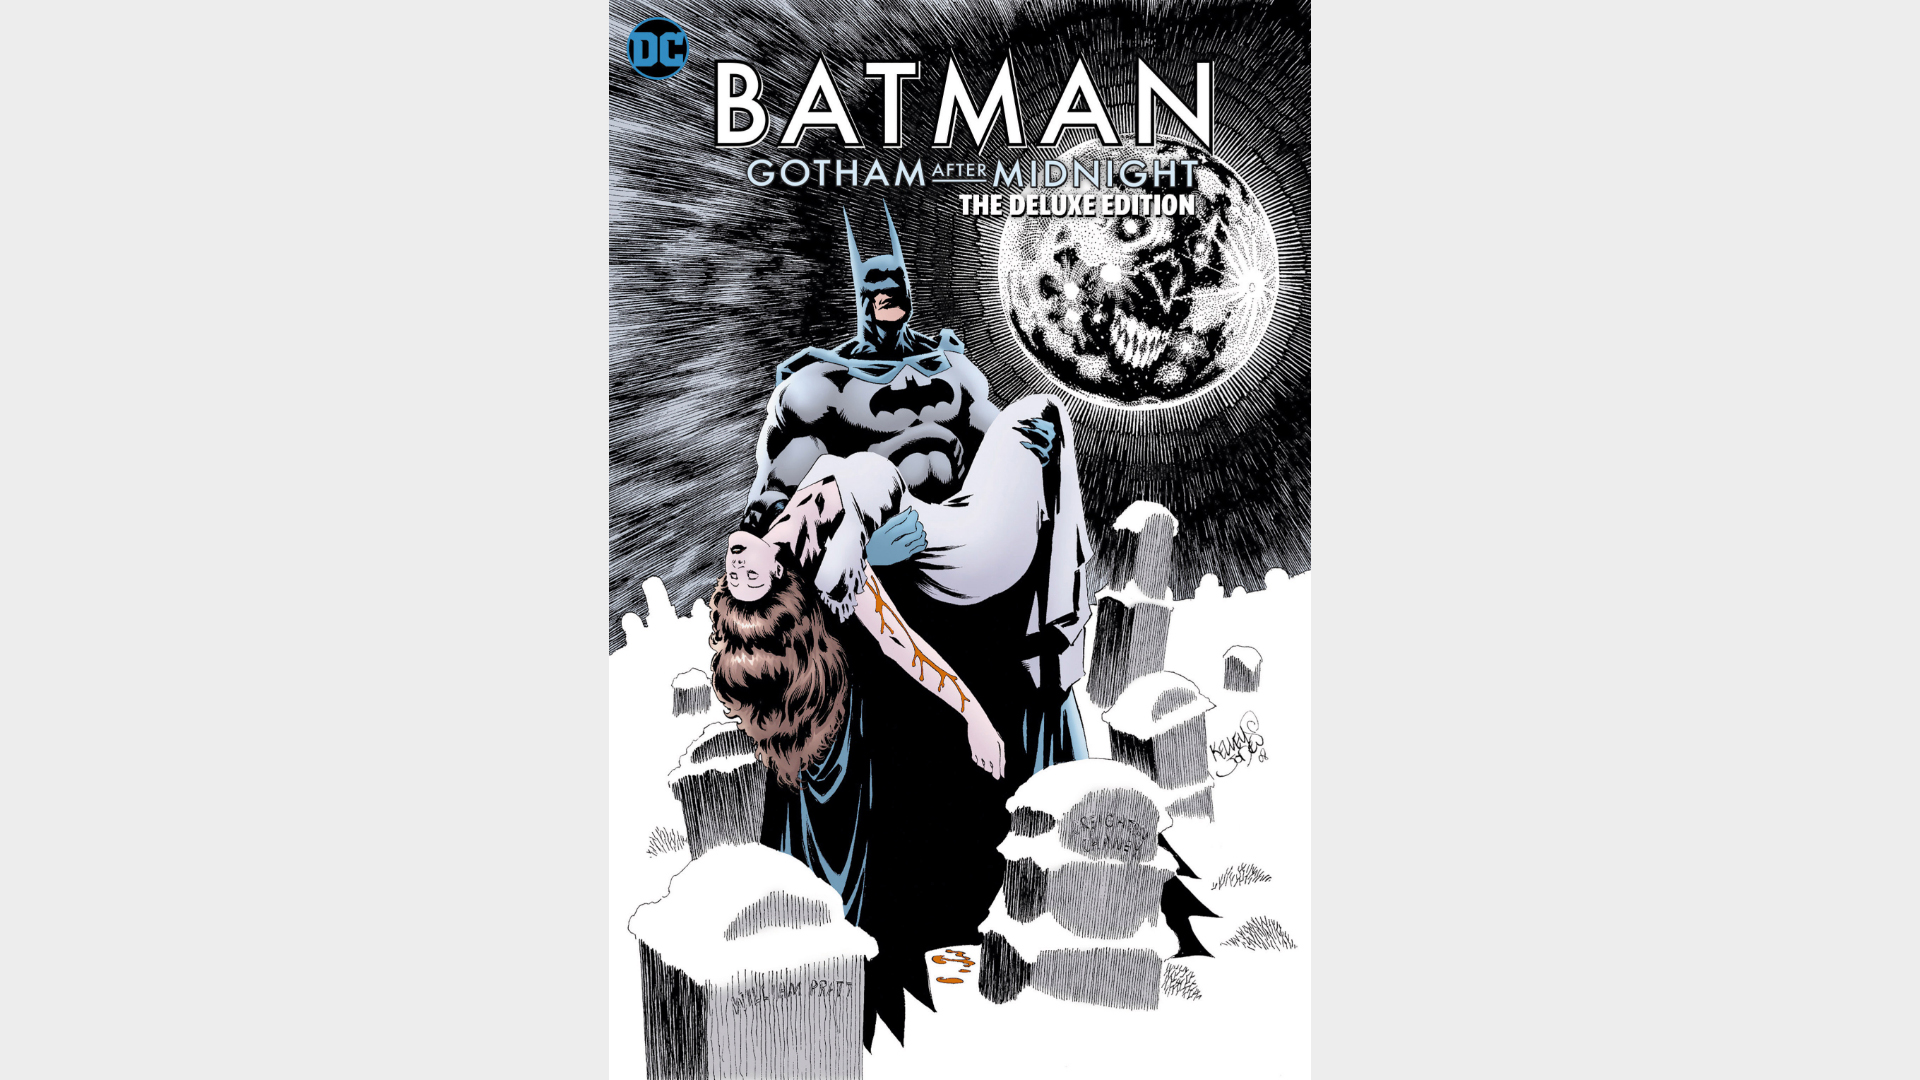 BATMAN: GOTHAM AFTER MIDNIGHT: THE DELUXE EDITION